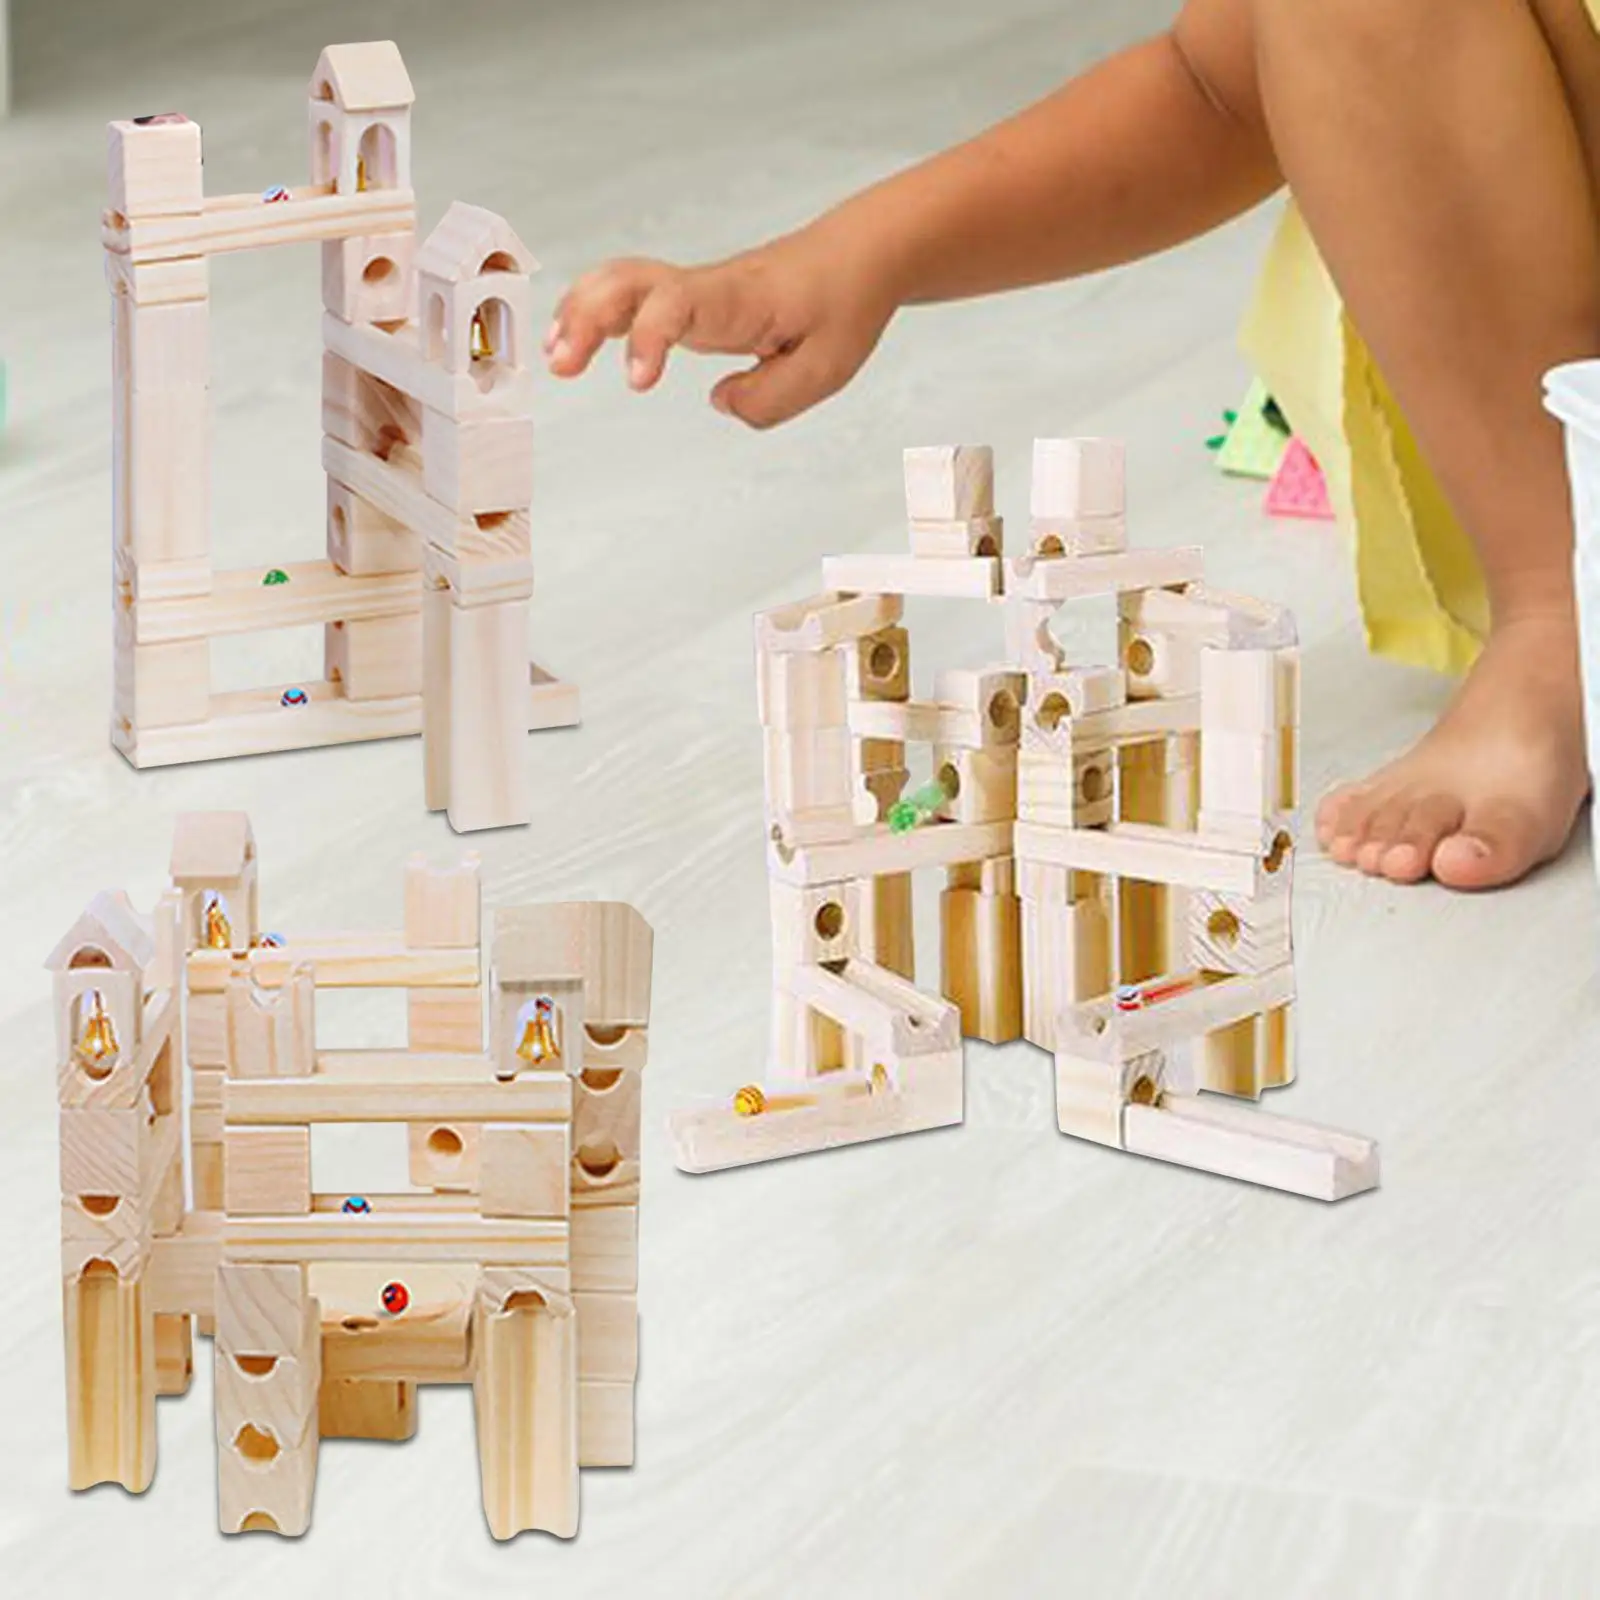 Wooden Marble Run Building Blocks Set, Marble Track Maze Game, Marble Ramps